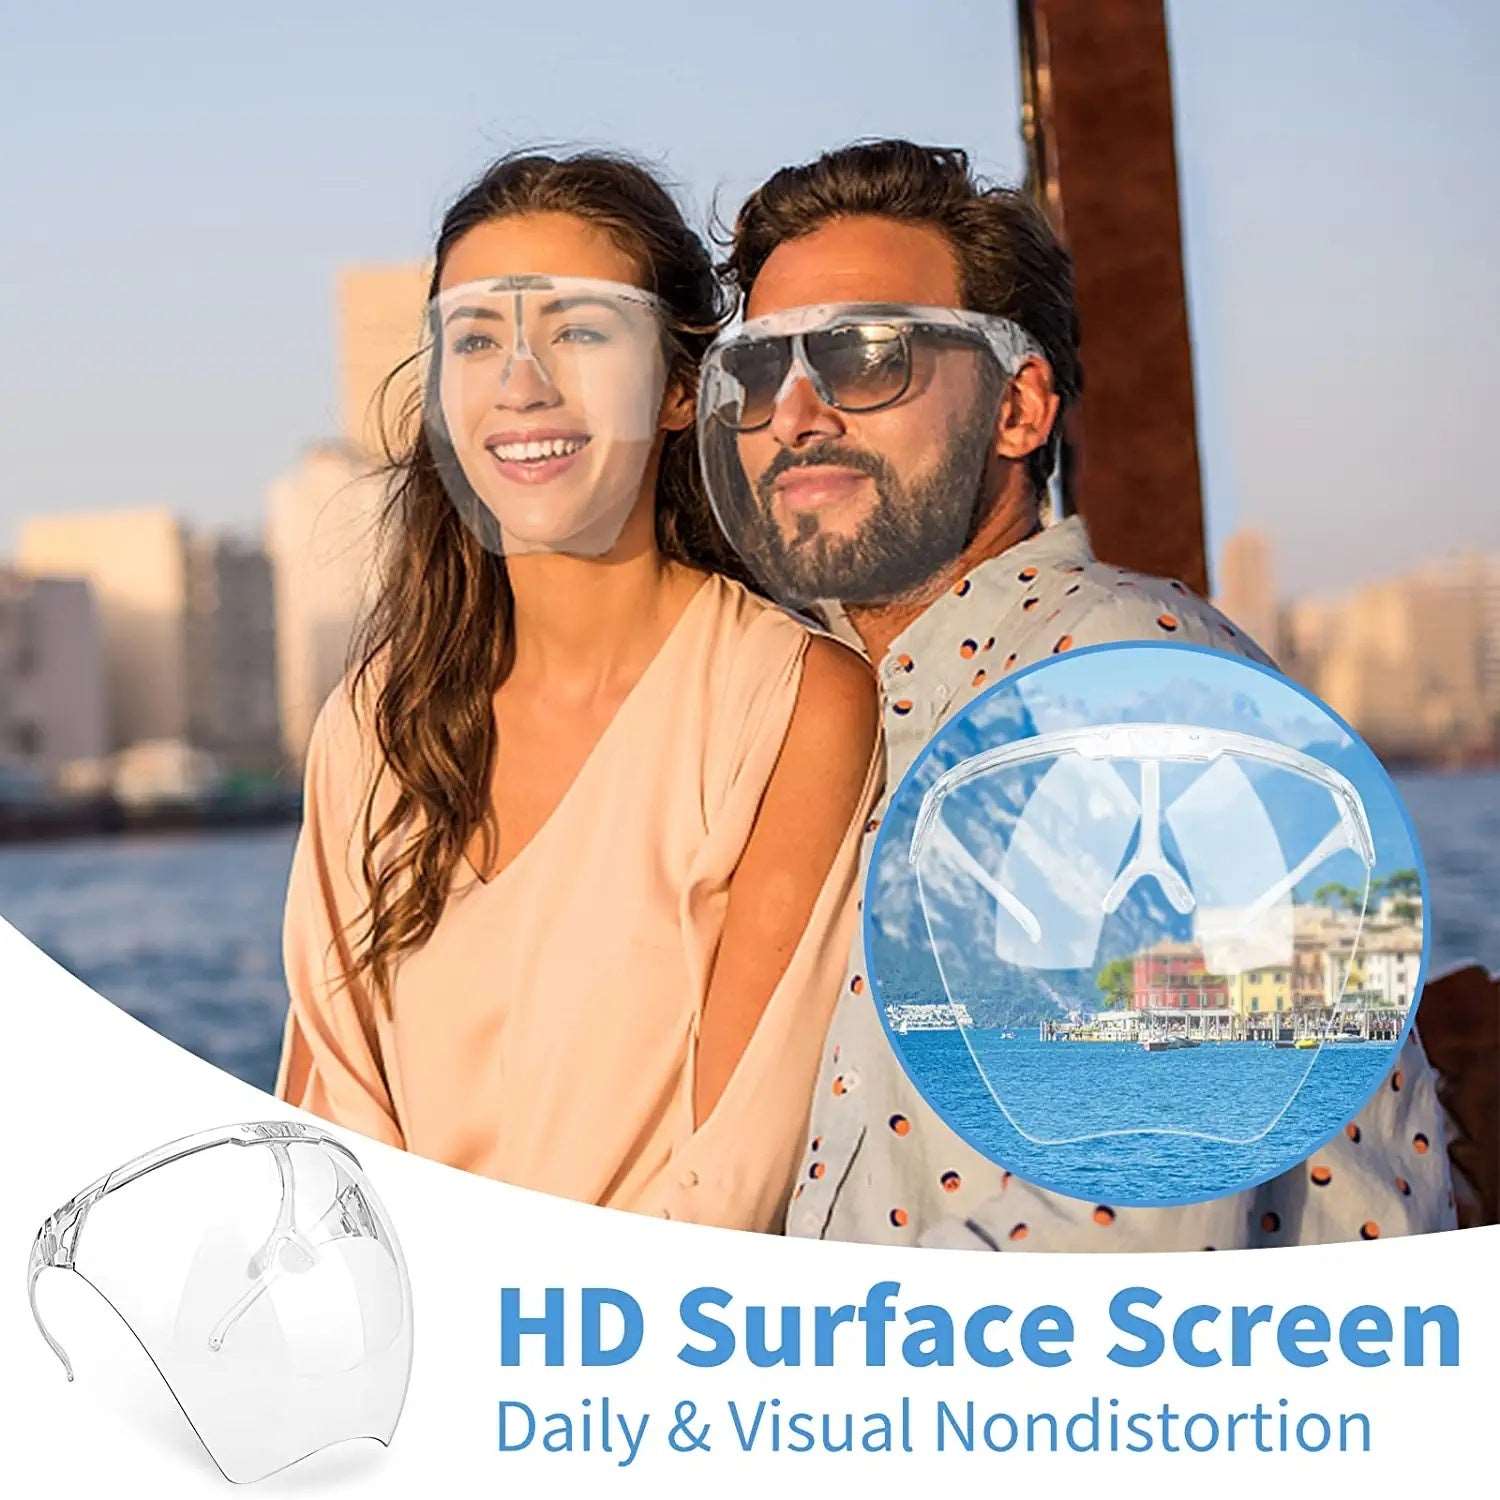 2 PCS Safety Face Shields;  Clear Face Guard with Glasses;  Anti-Fog Transparent Full Face Mask Protect Eye Nose Mouth;  Reusable Protective Plastic Face Shield Mask Droplet Splash Guard for Men Women